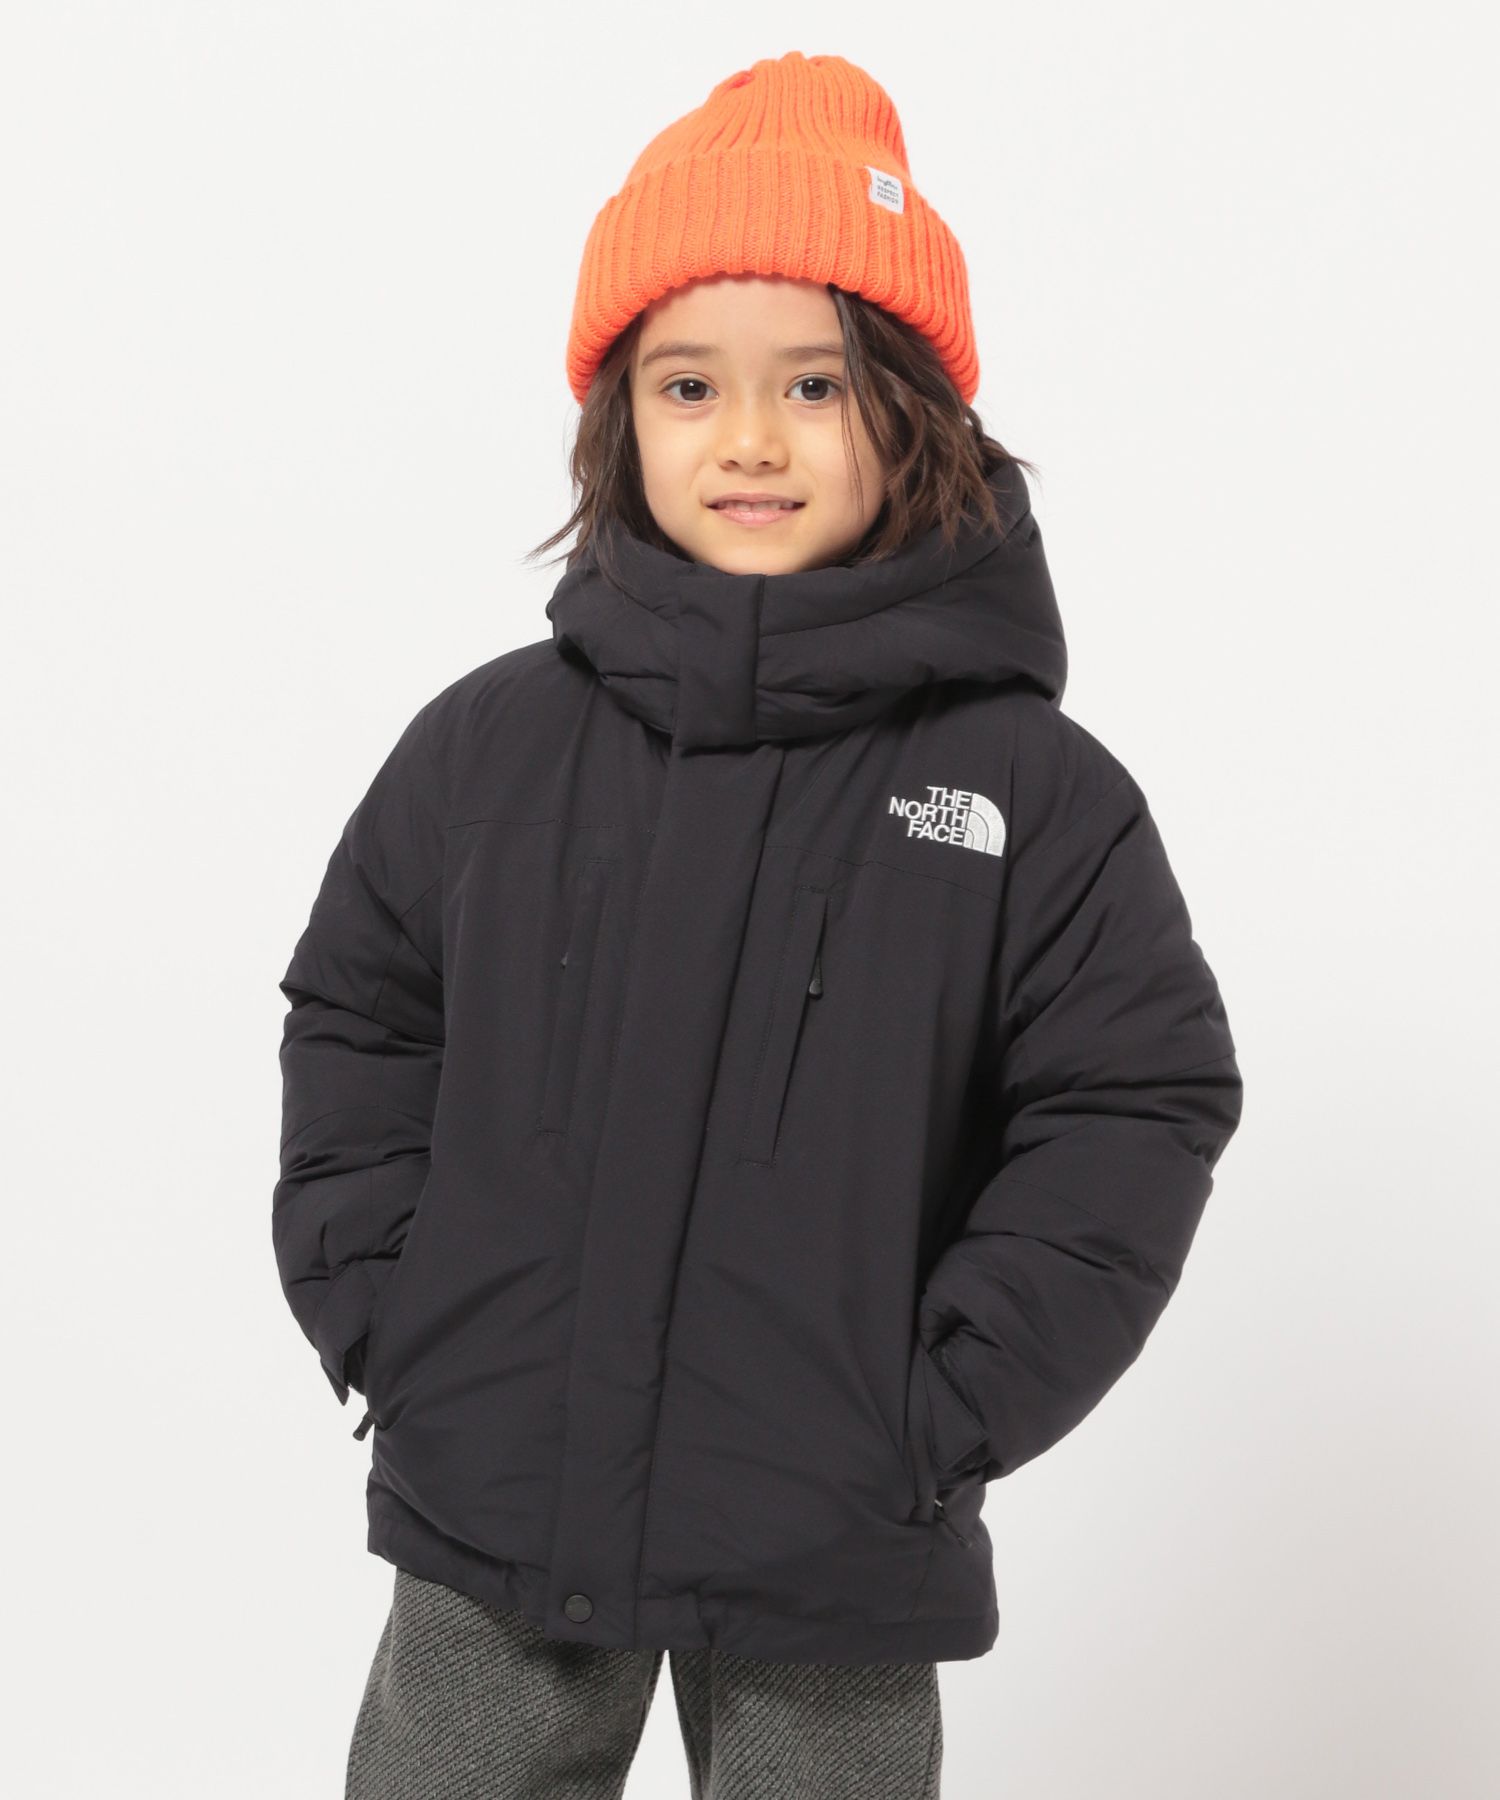 THE NORTH FACE バルトロライトジャケット　キッズ140㎝　黒ダウン